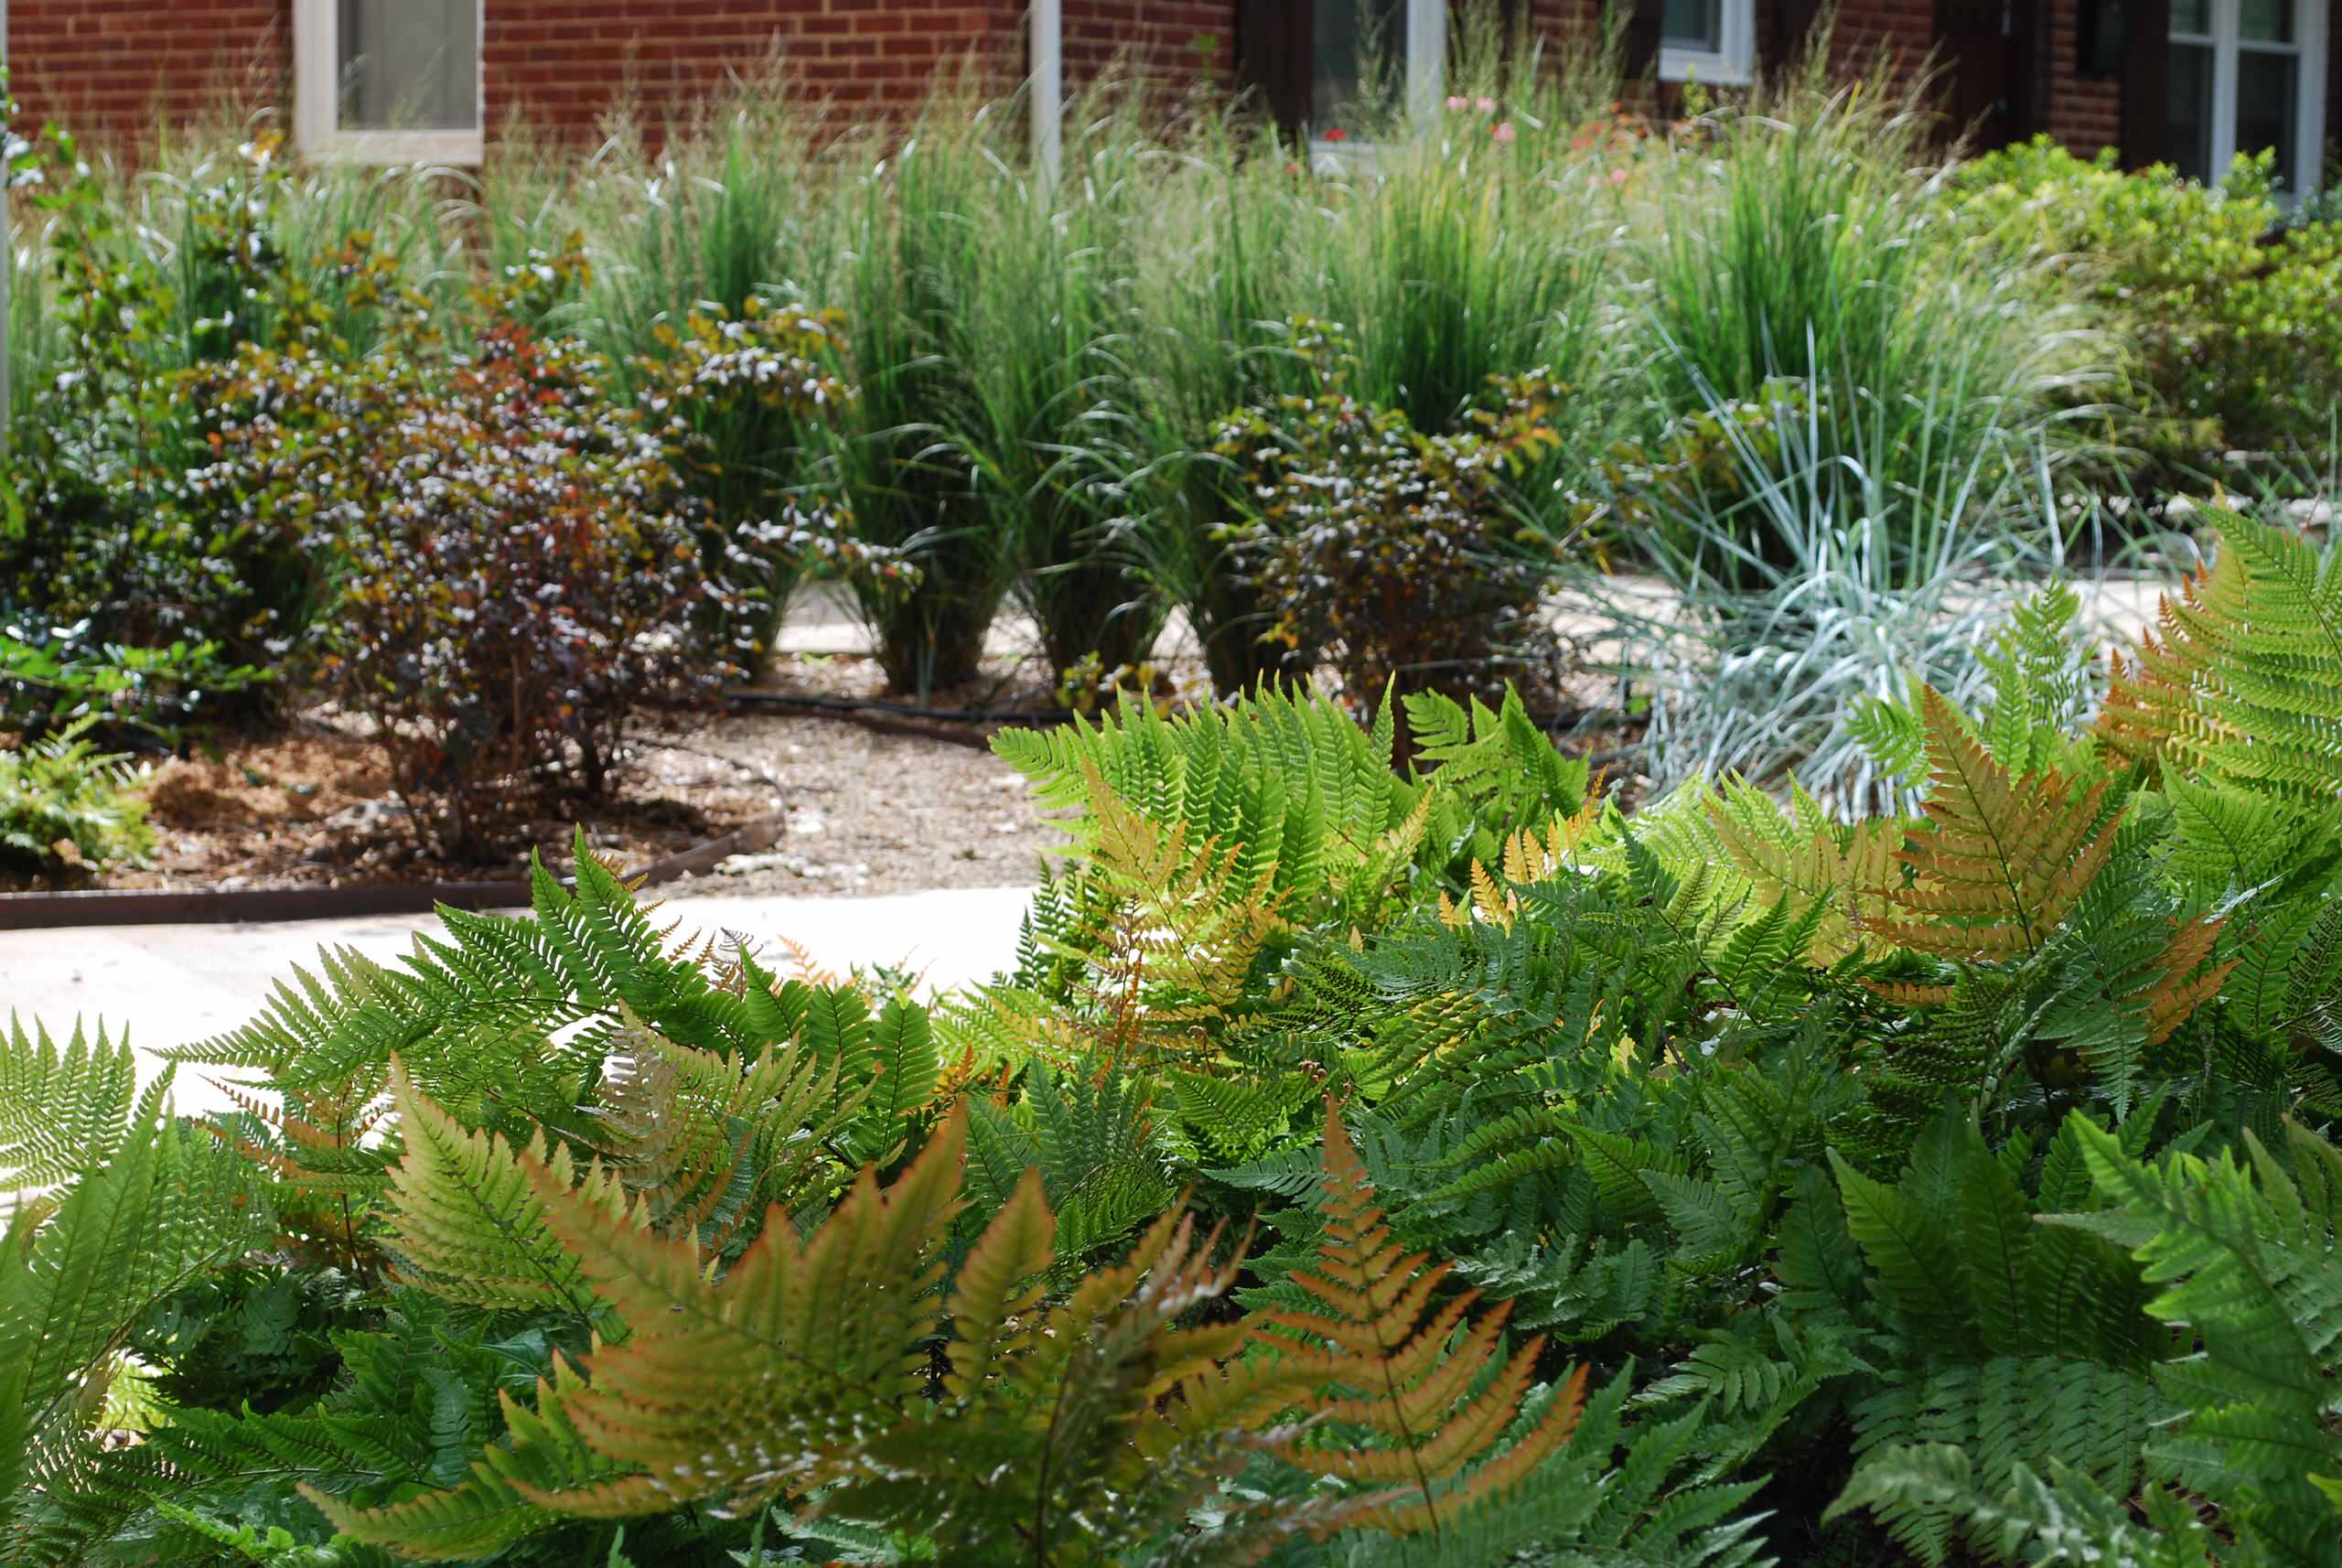 Turf-less front yard provides unexpected color and texture.